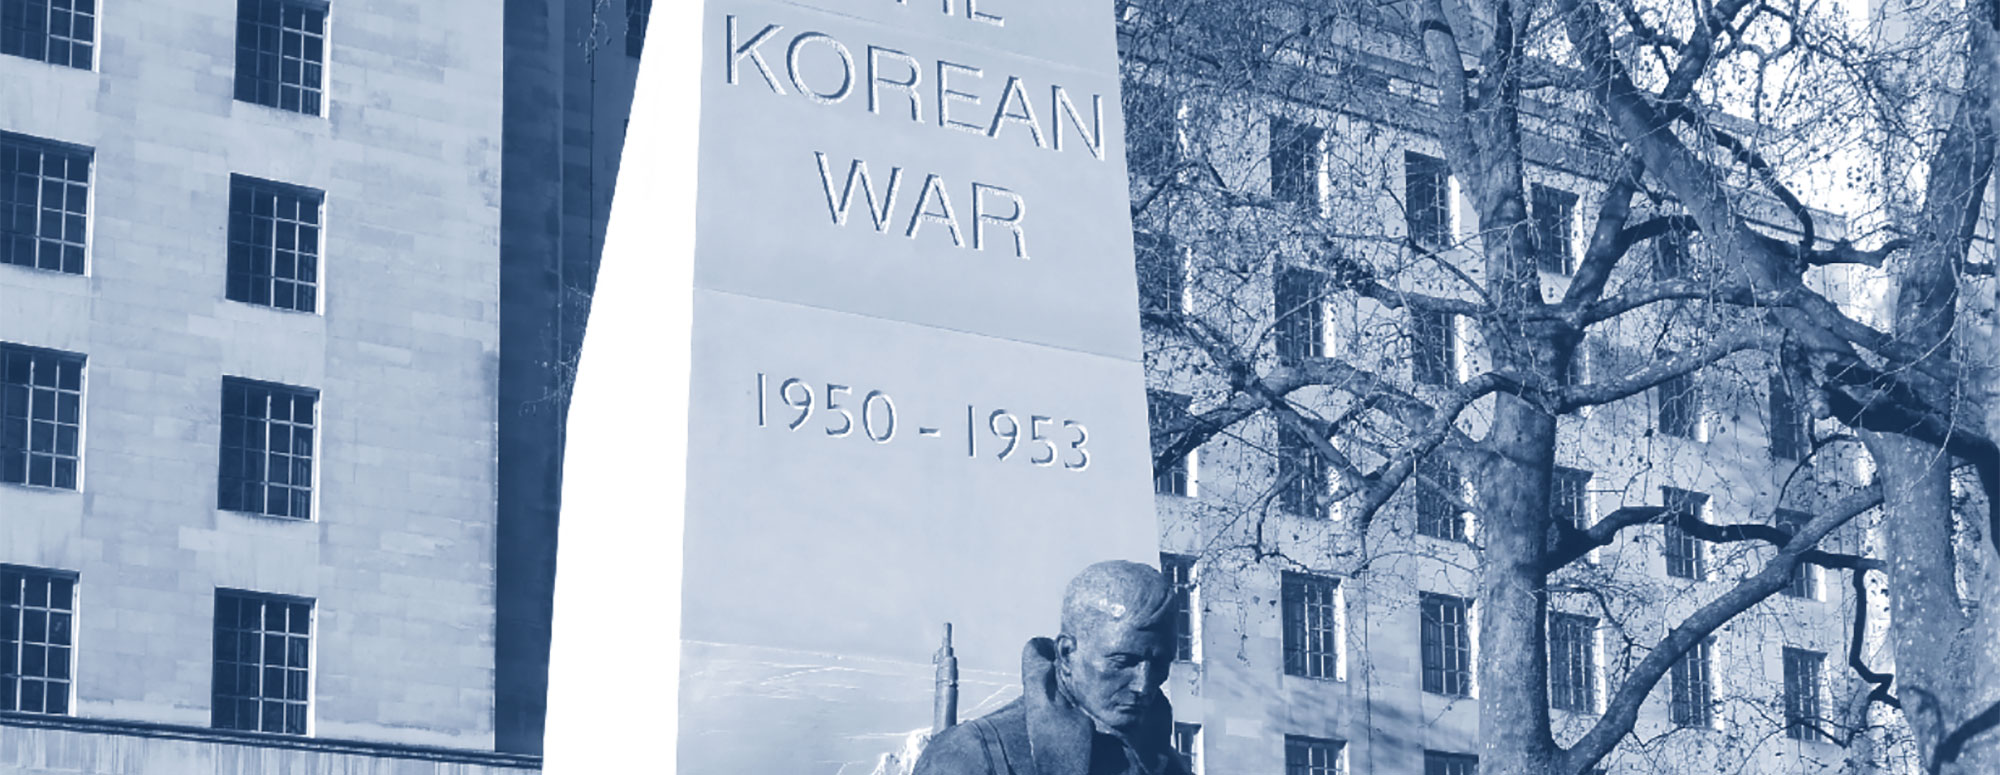 New Publication: Exploring and Teaching the Korean War